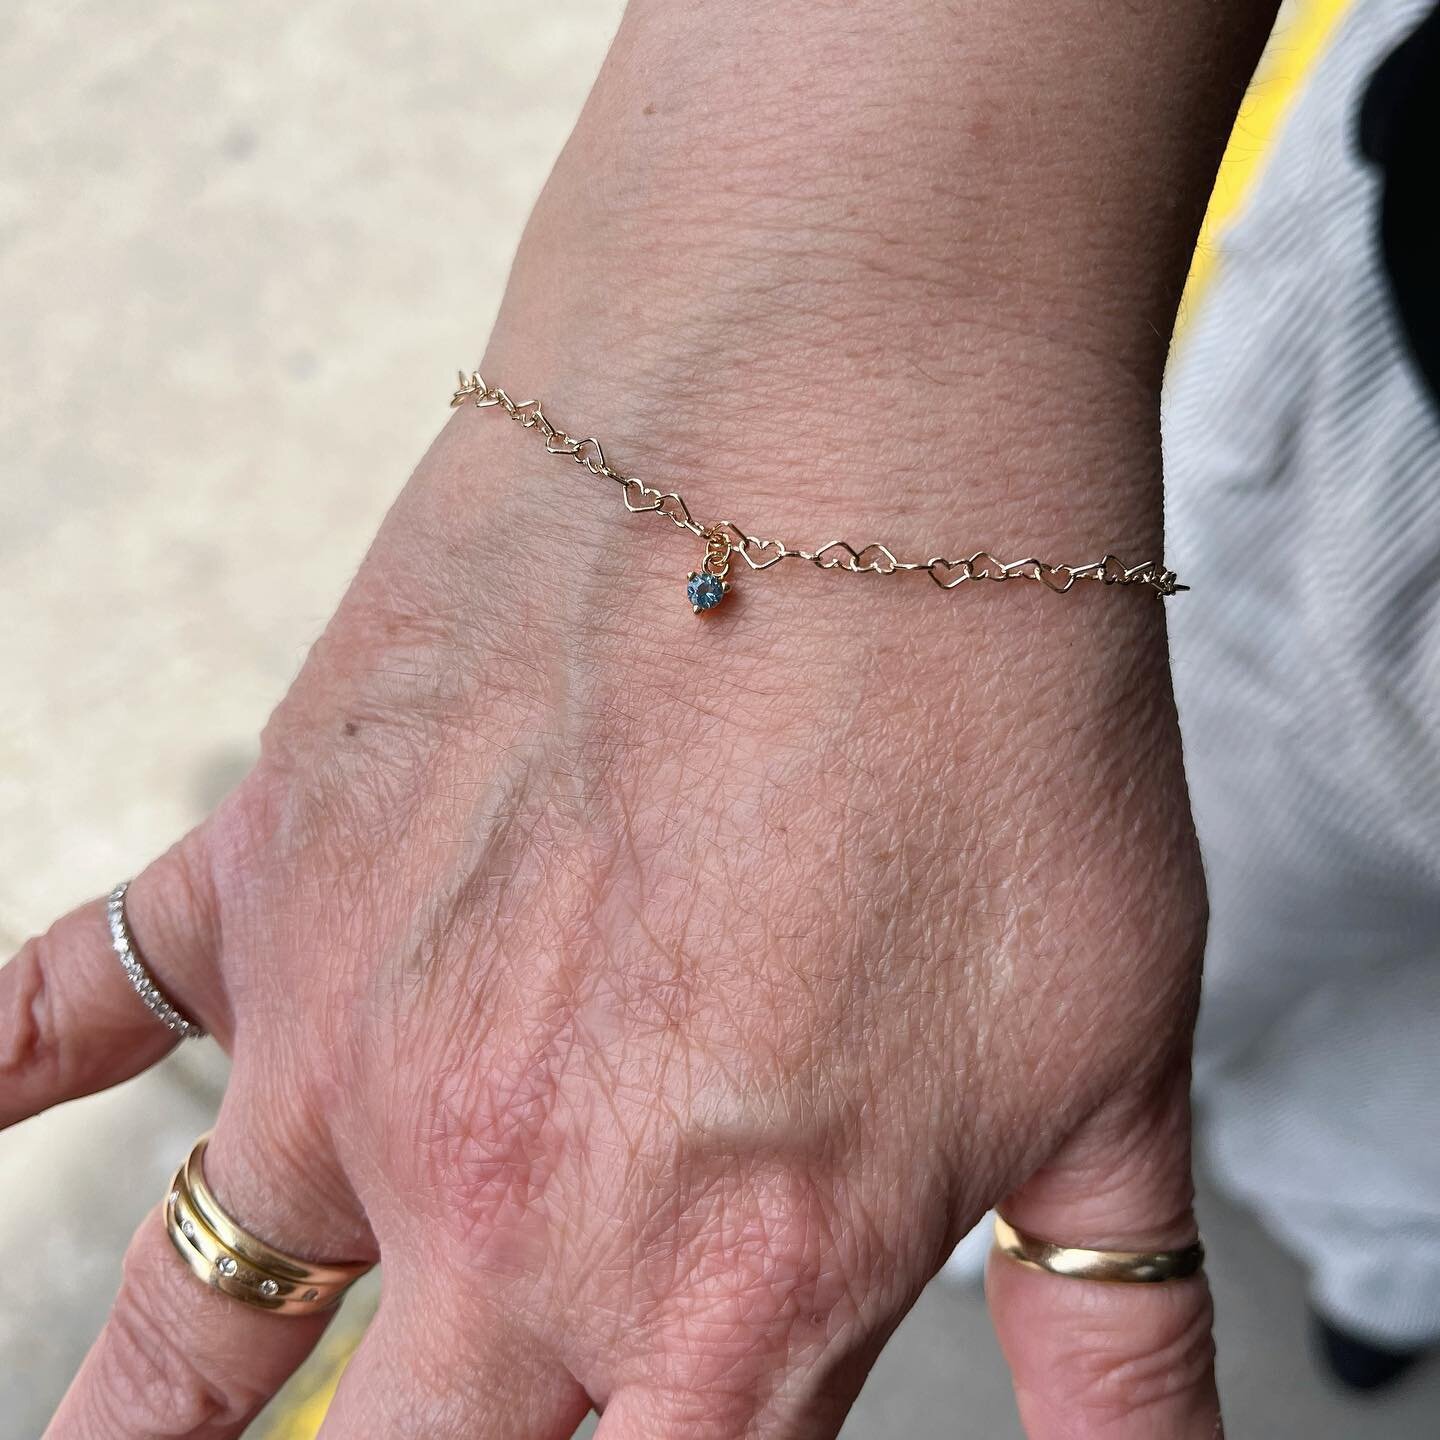 A sweet little Mother&rsquo;s Day treat - a permanent bracelet in 14k yellow gold featuring a genuine aquamarine charm. 

SPARK ⚡️ by @buildbycowpok offers permanent jewelry appointments for pieces you never have to take off. Book your next appointme